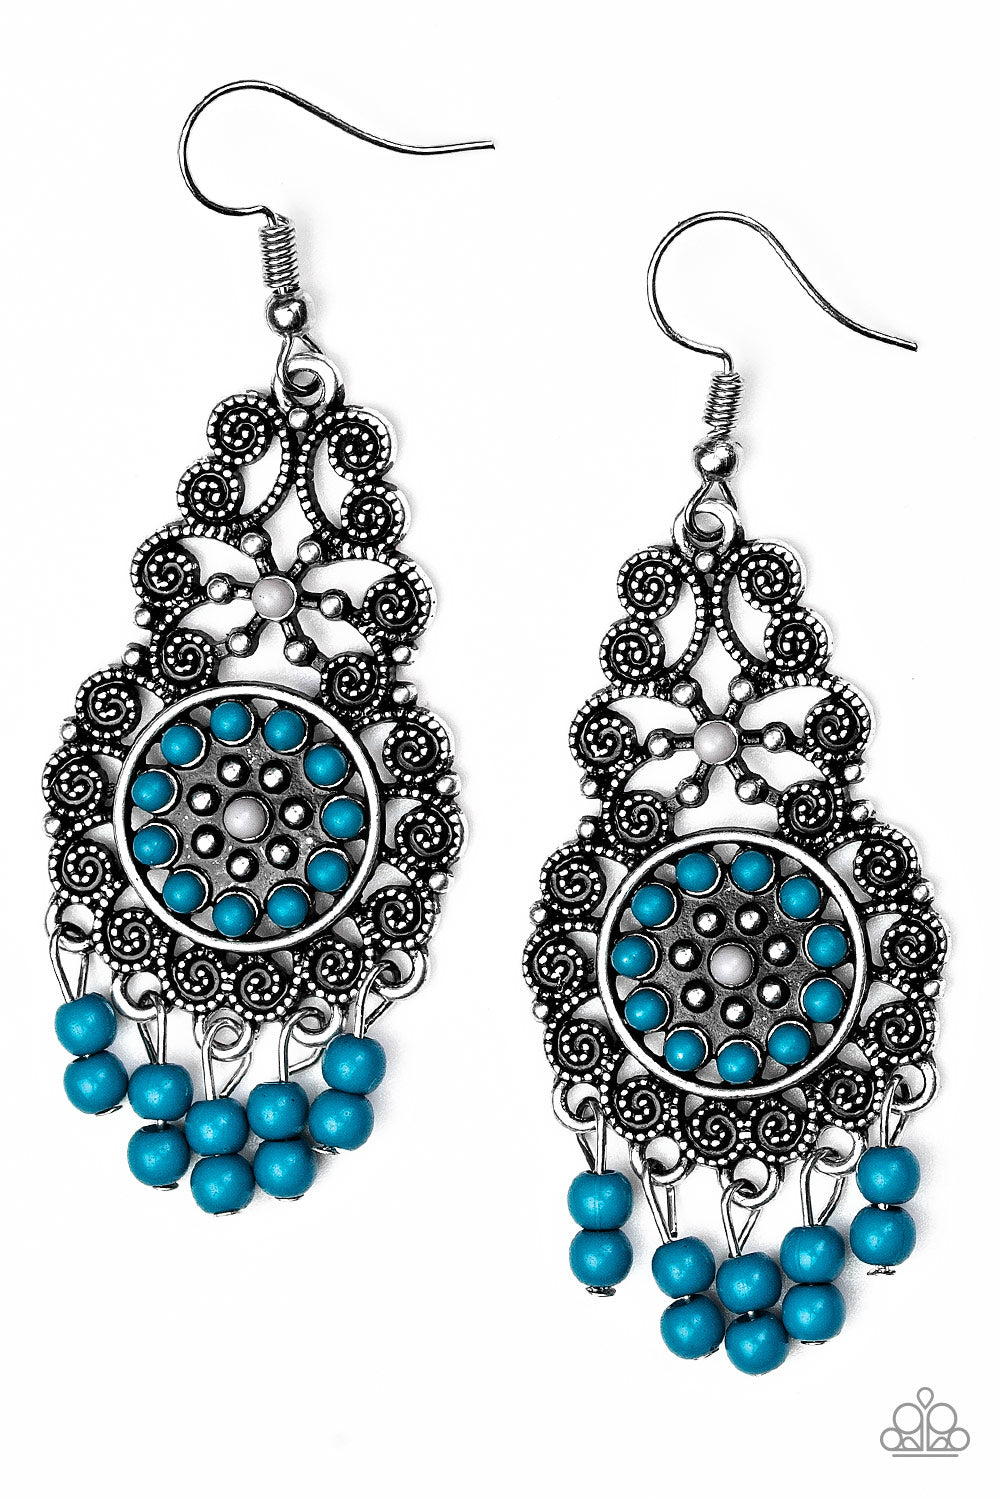 Courageously Congo Blue Earring - Paparazzi Accessories  Dainty blue and gray beads are pressed into an ornate silver frame swirling with filigree detail. Dainty beaded tassels swing from the bottom of the lure, creating a whimsical fringe. Earring attaches to standard fishhook fitting.   All Paparazzi Accessories are lead free and nickel free!  Sold as one pair of earrings.